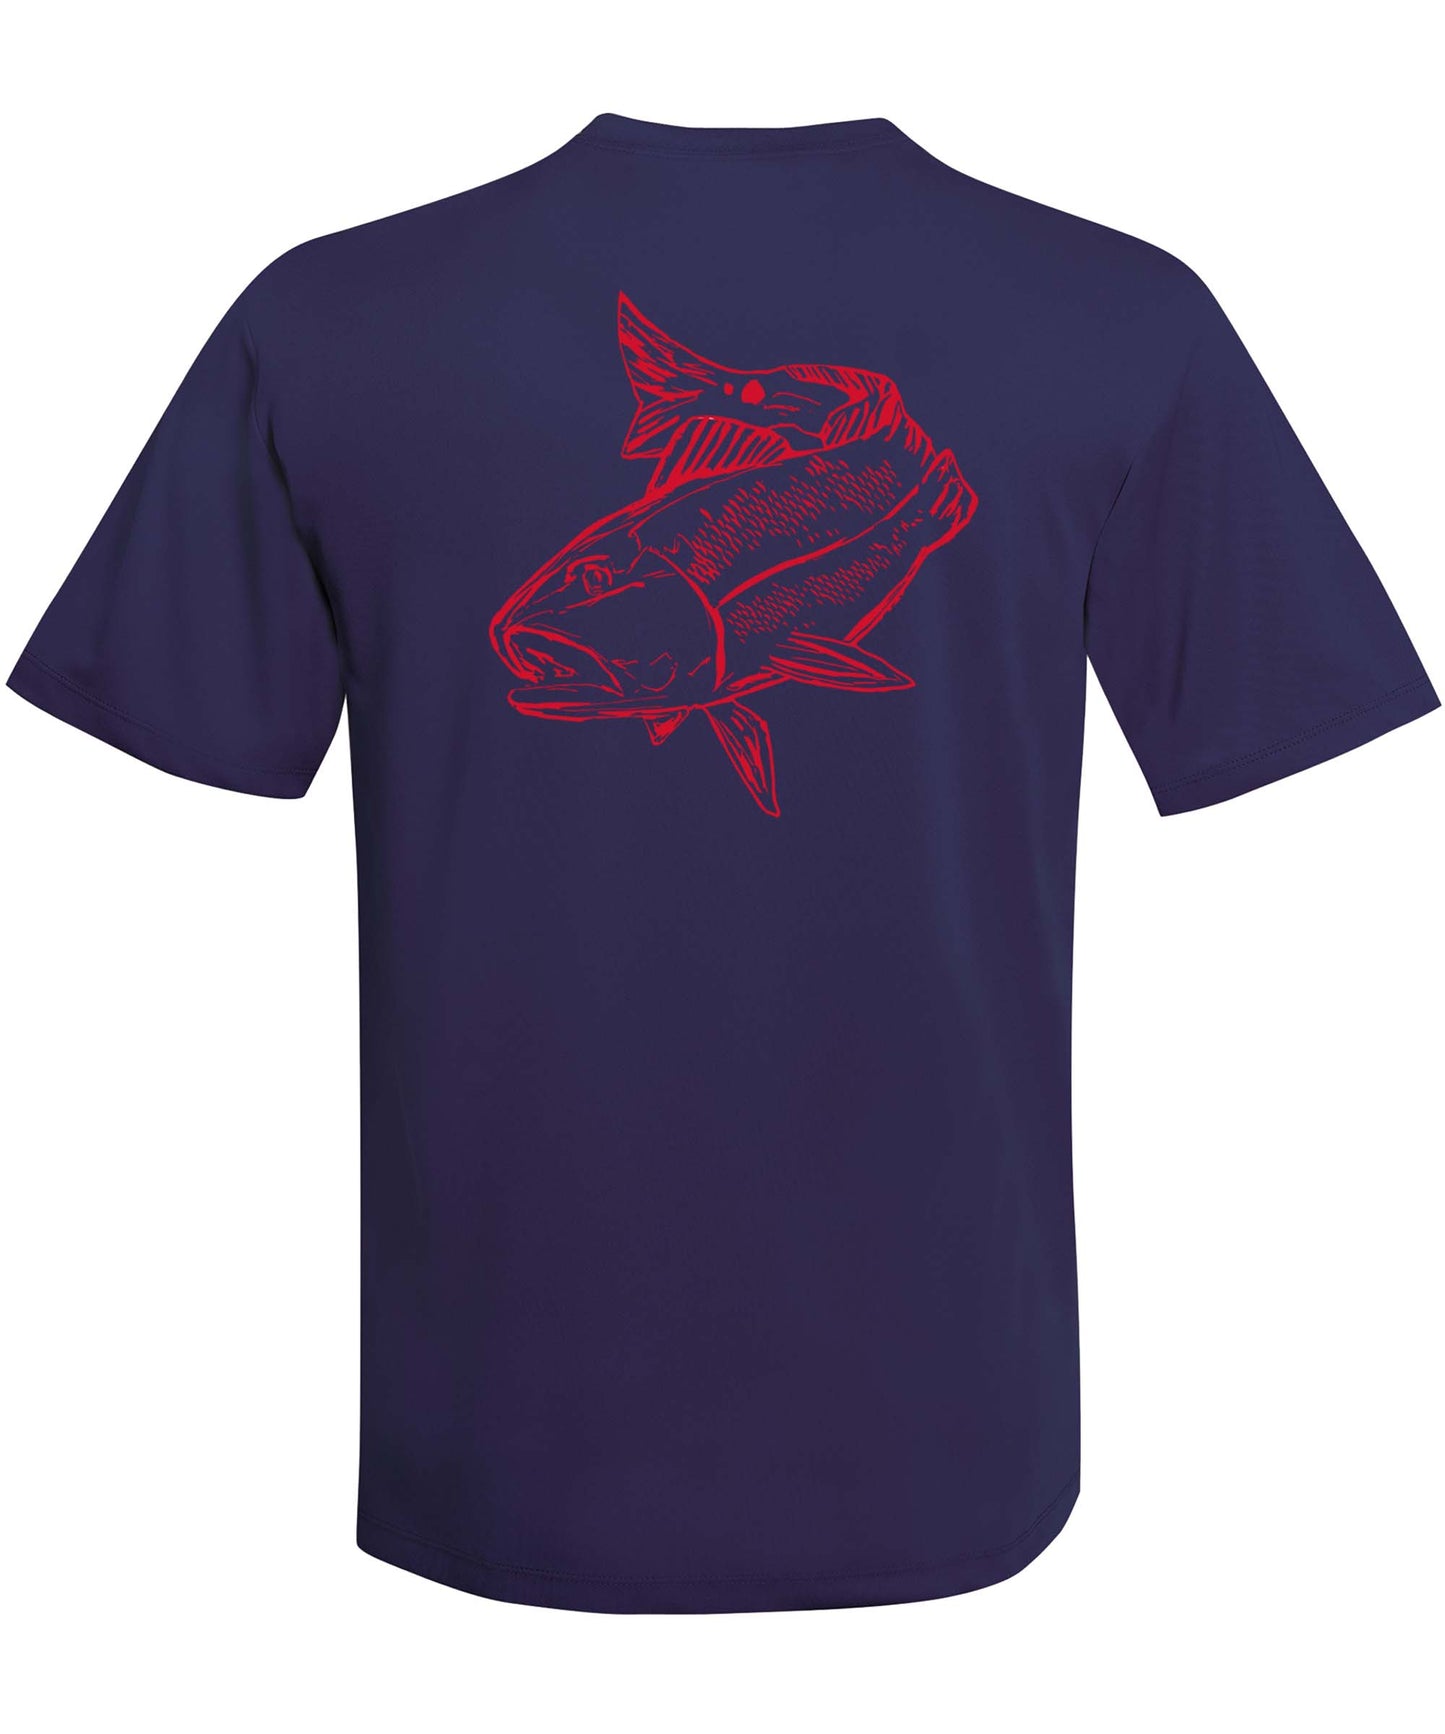 Redfish Performance Dry-Fit Fishing shirts with Sun Protection - Navy Short Sleeve